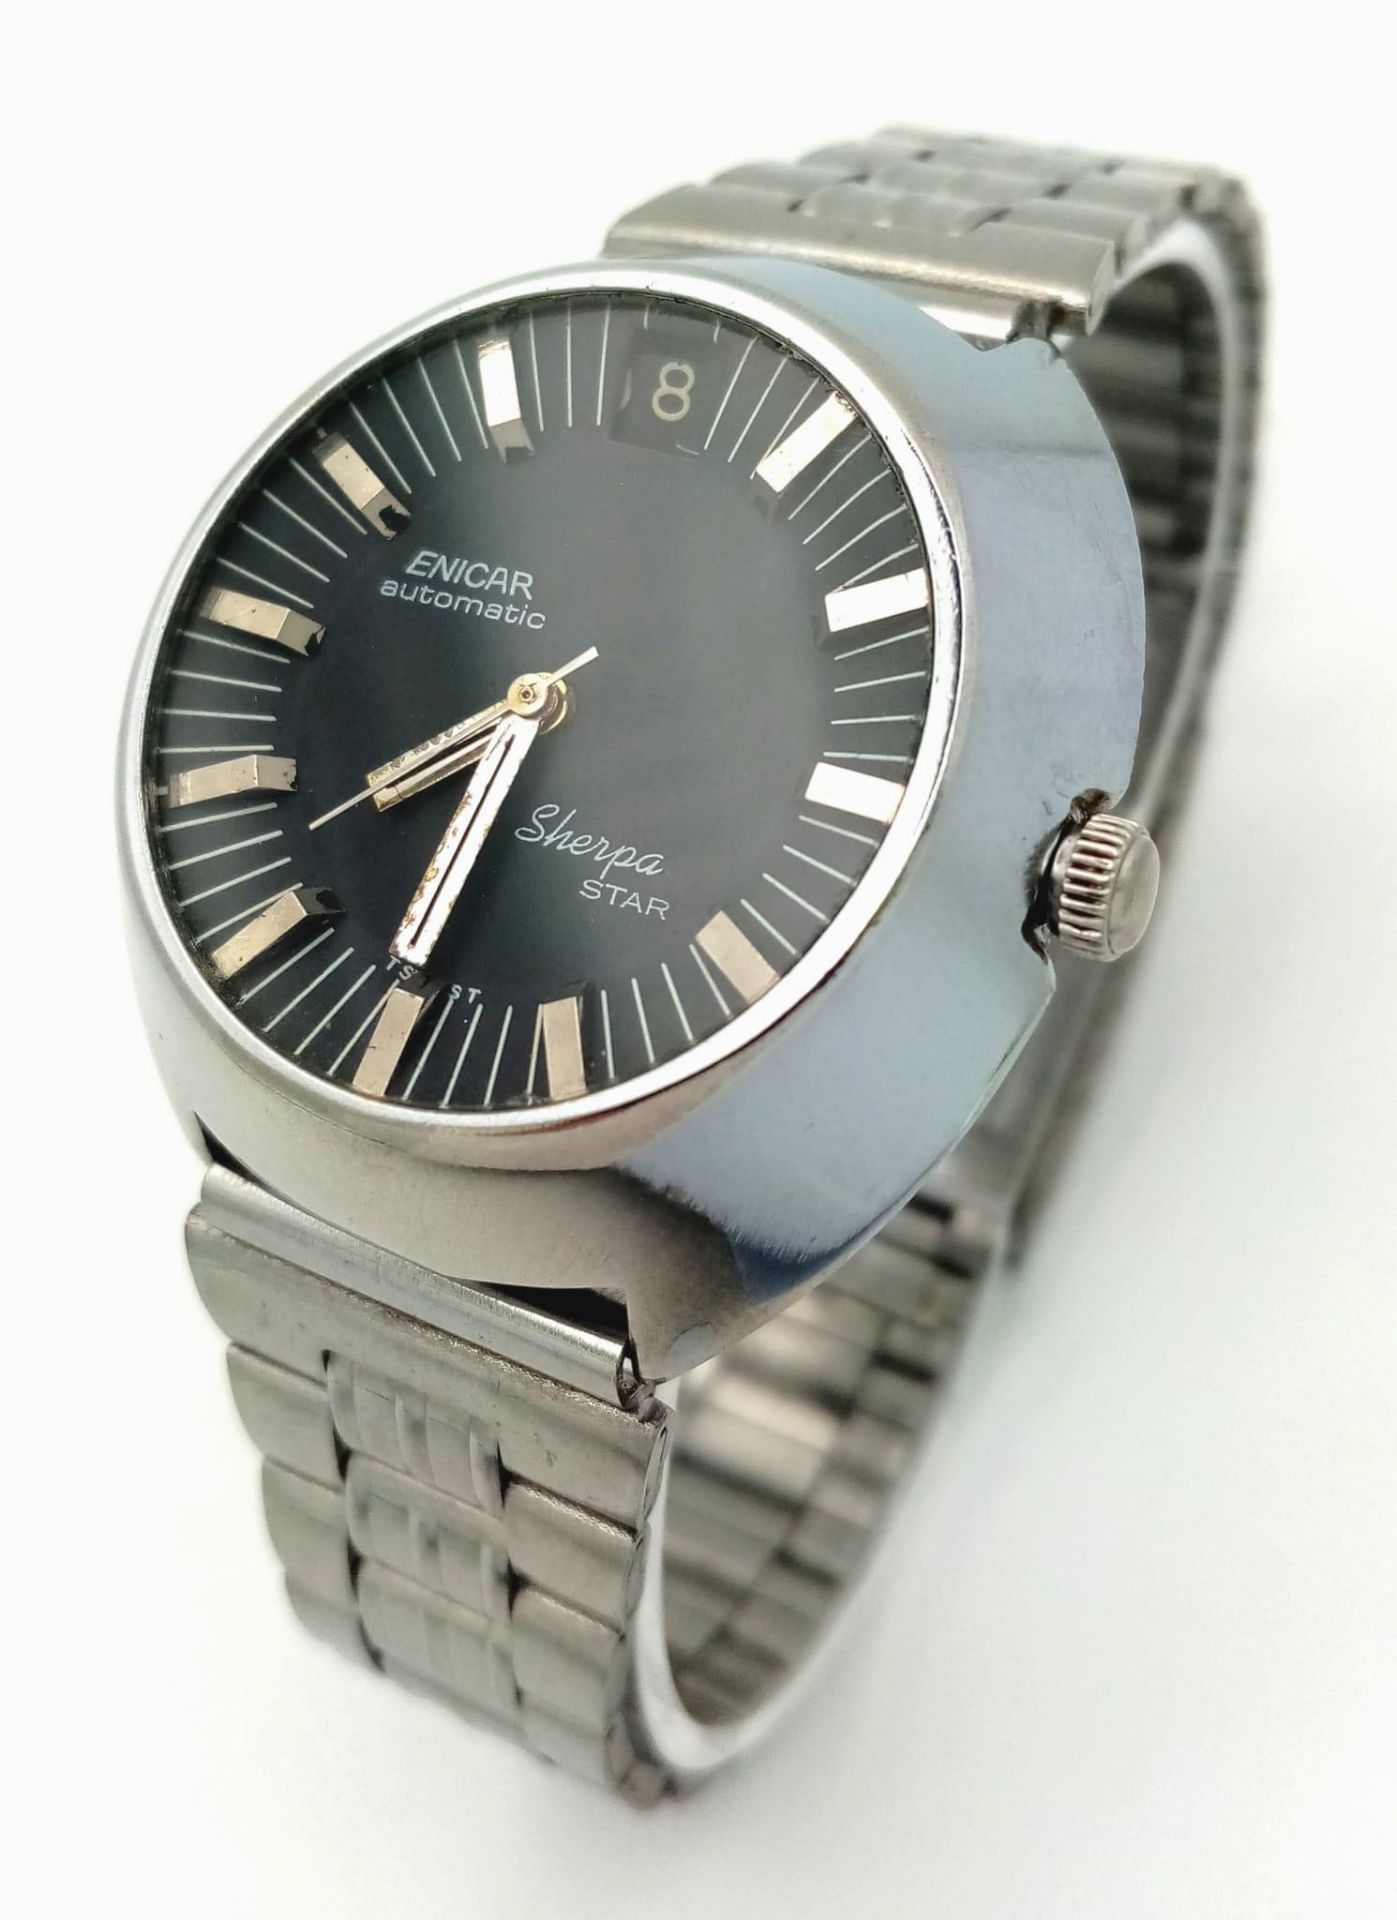 A Very Rare Enicar Sherpa Automatic Gents Watch. Stainless steel strap and case - 38mm. Black dial - Image 3 of 8